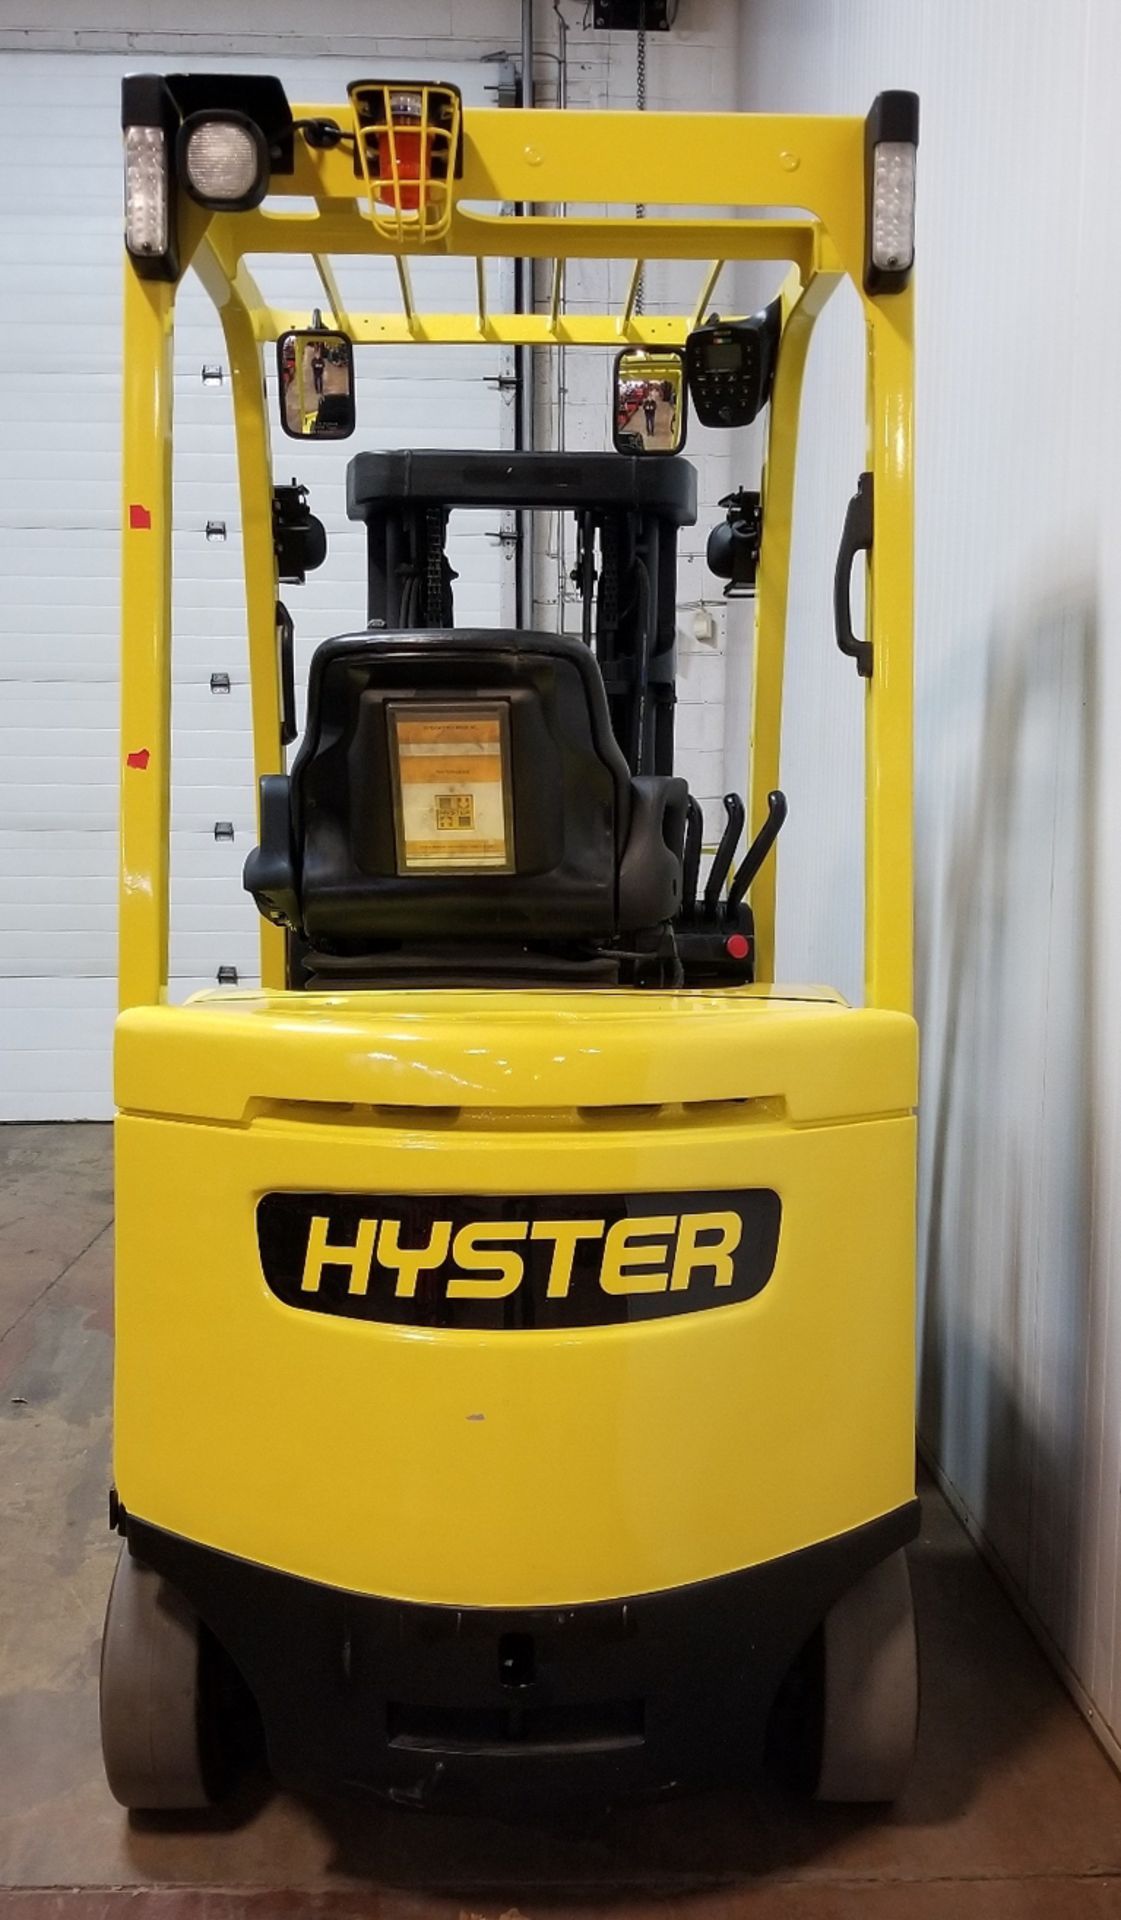 HYSTER (2017) E45XN 4,500 LB. CAPACITY 48V ELECTRIC FORKLIFT WITH 189" MAX. LIFT HEIGHT, SIDE SHIFT - Image 3 of 3